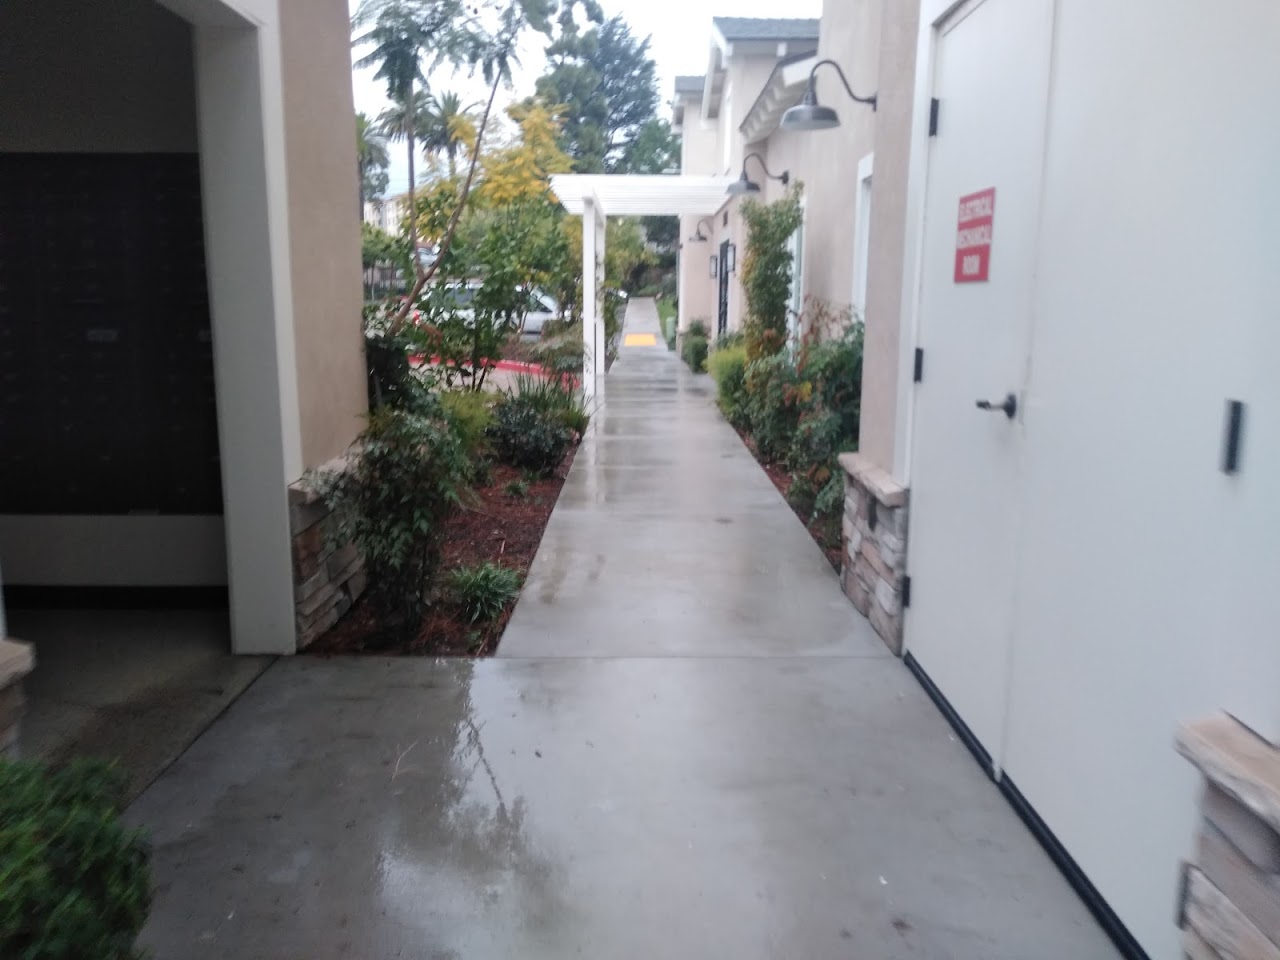 Photo of GRANGER APARTMENTS. Affordable housing located at 2700 E 8TH STREET NATIONAL CITY, CA 91950